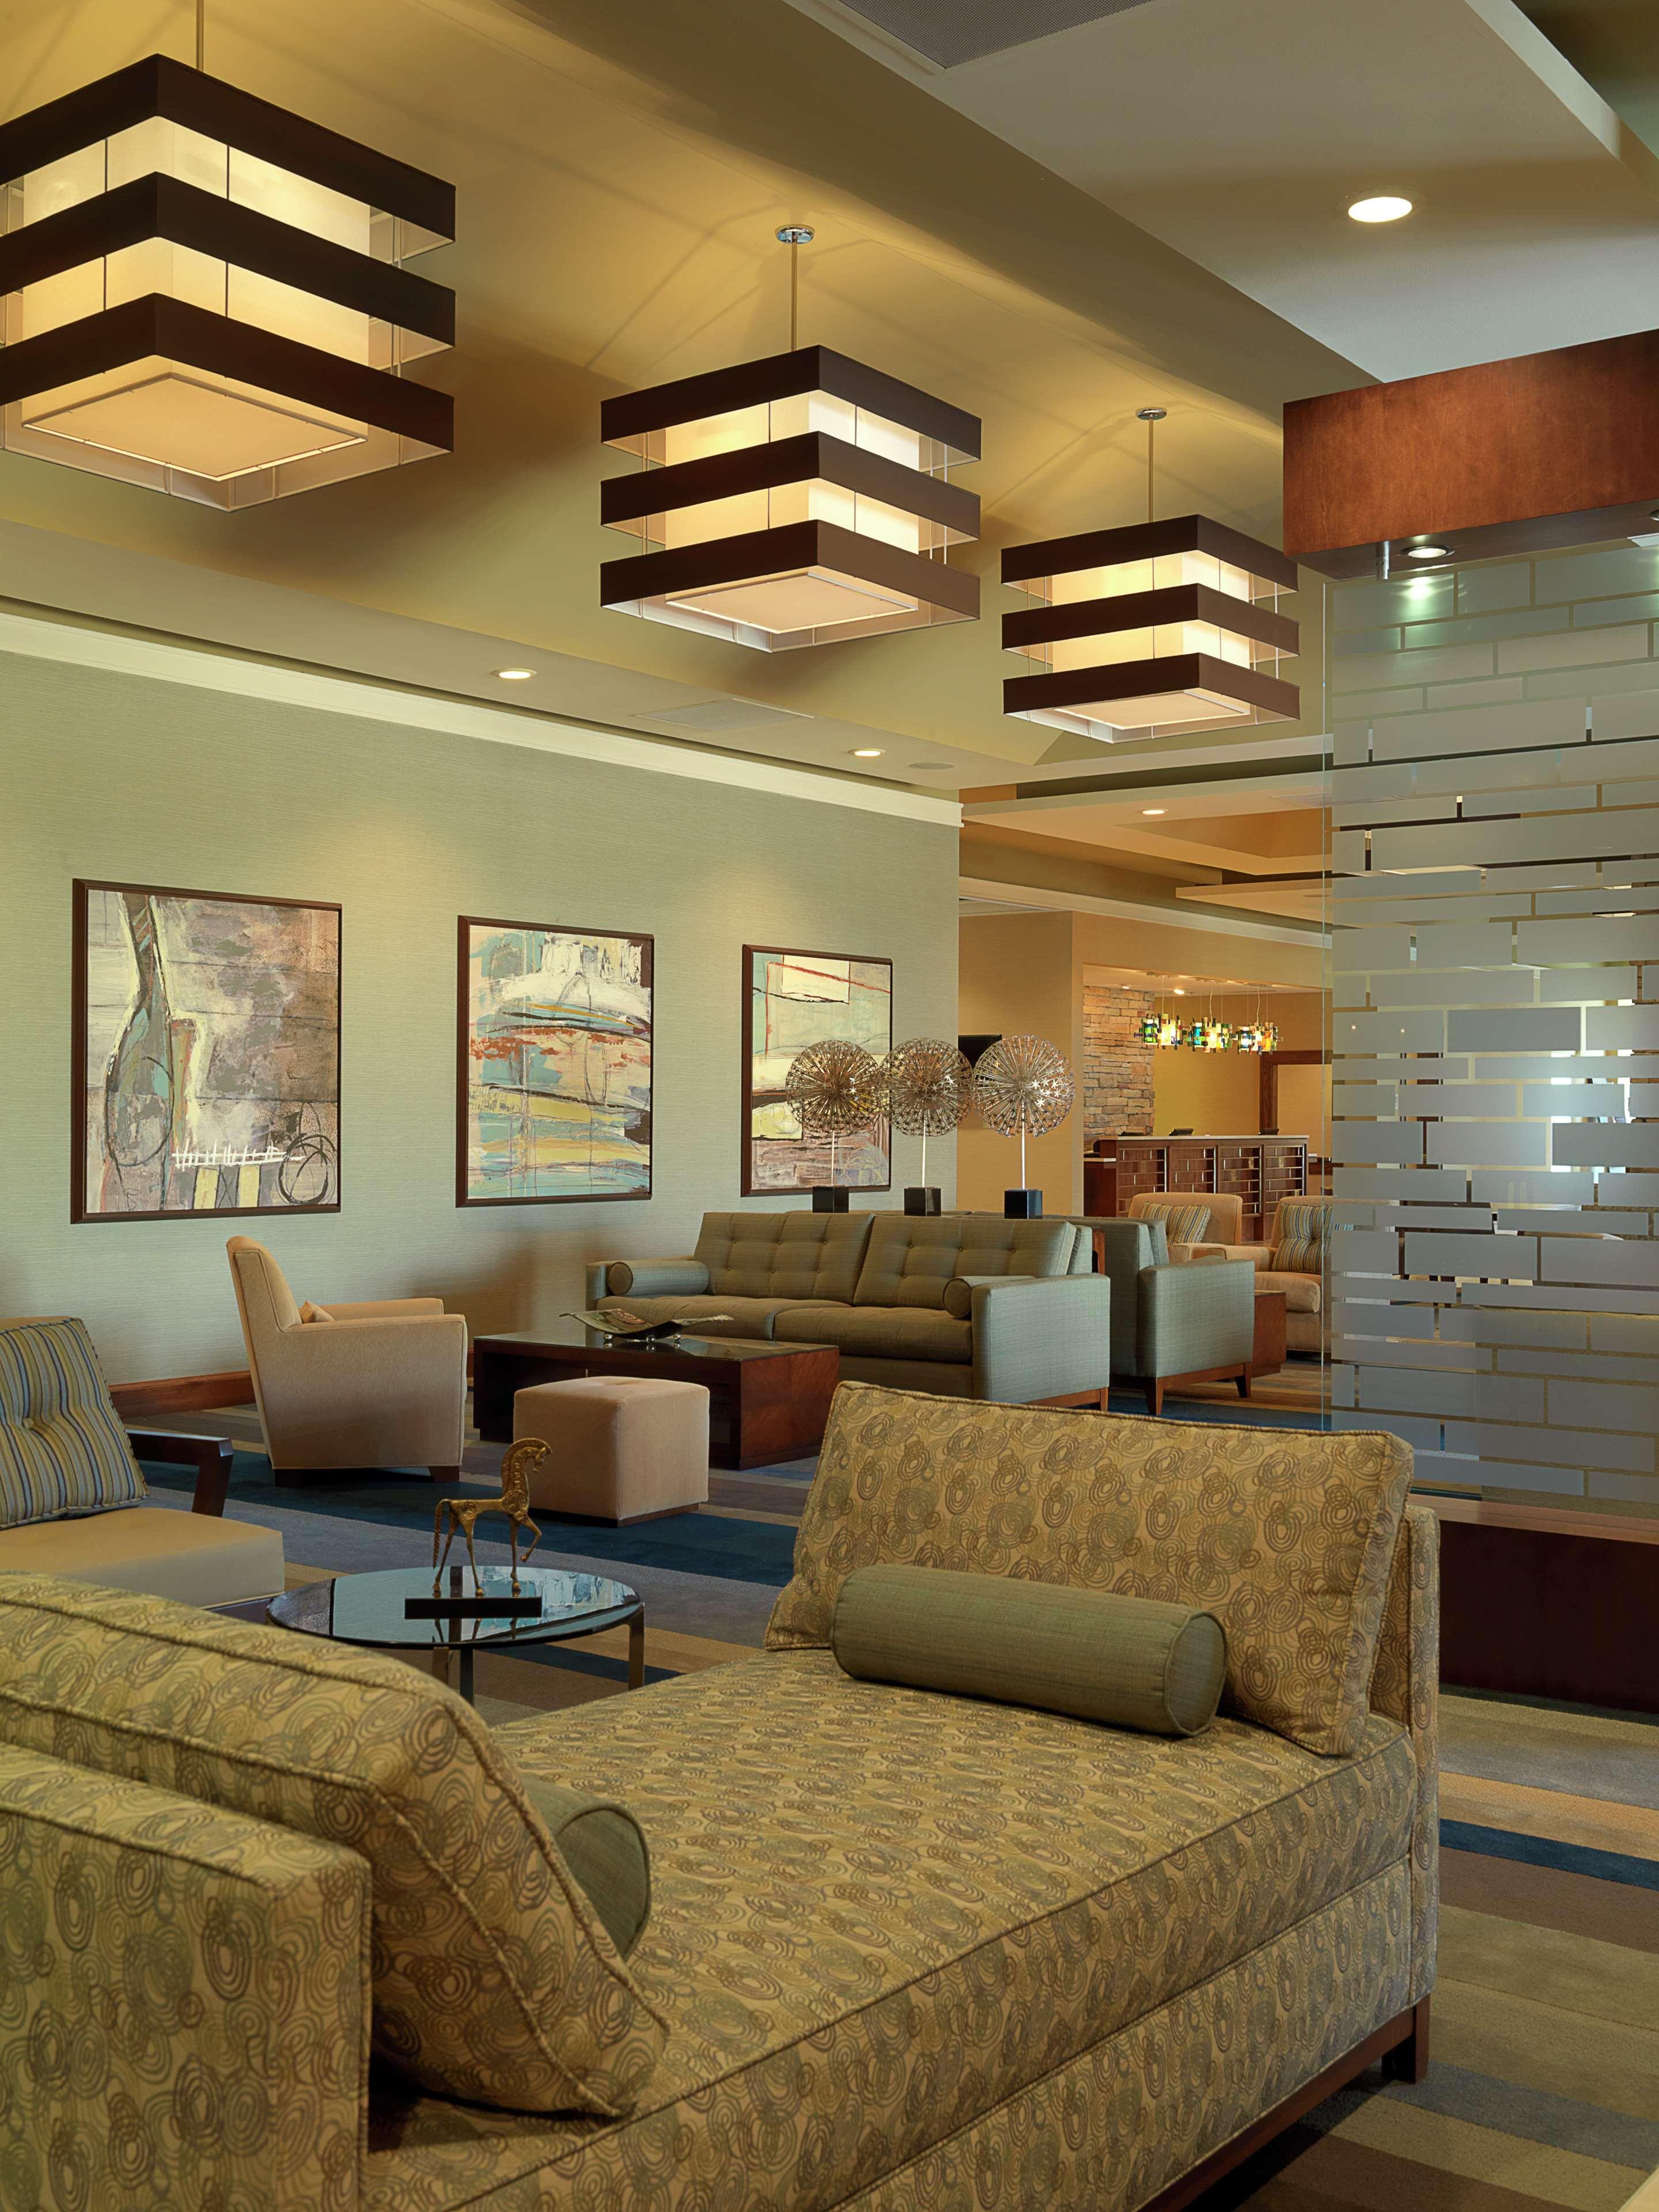 Doubletree By Hilton Collinsville/St.Louis Интерьер фото